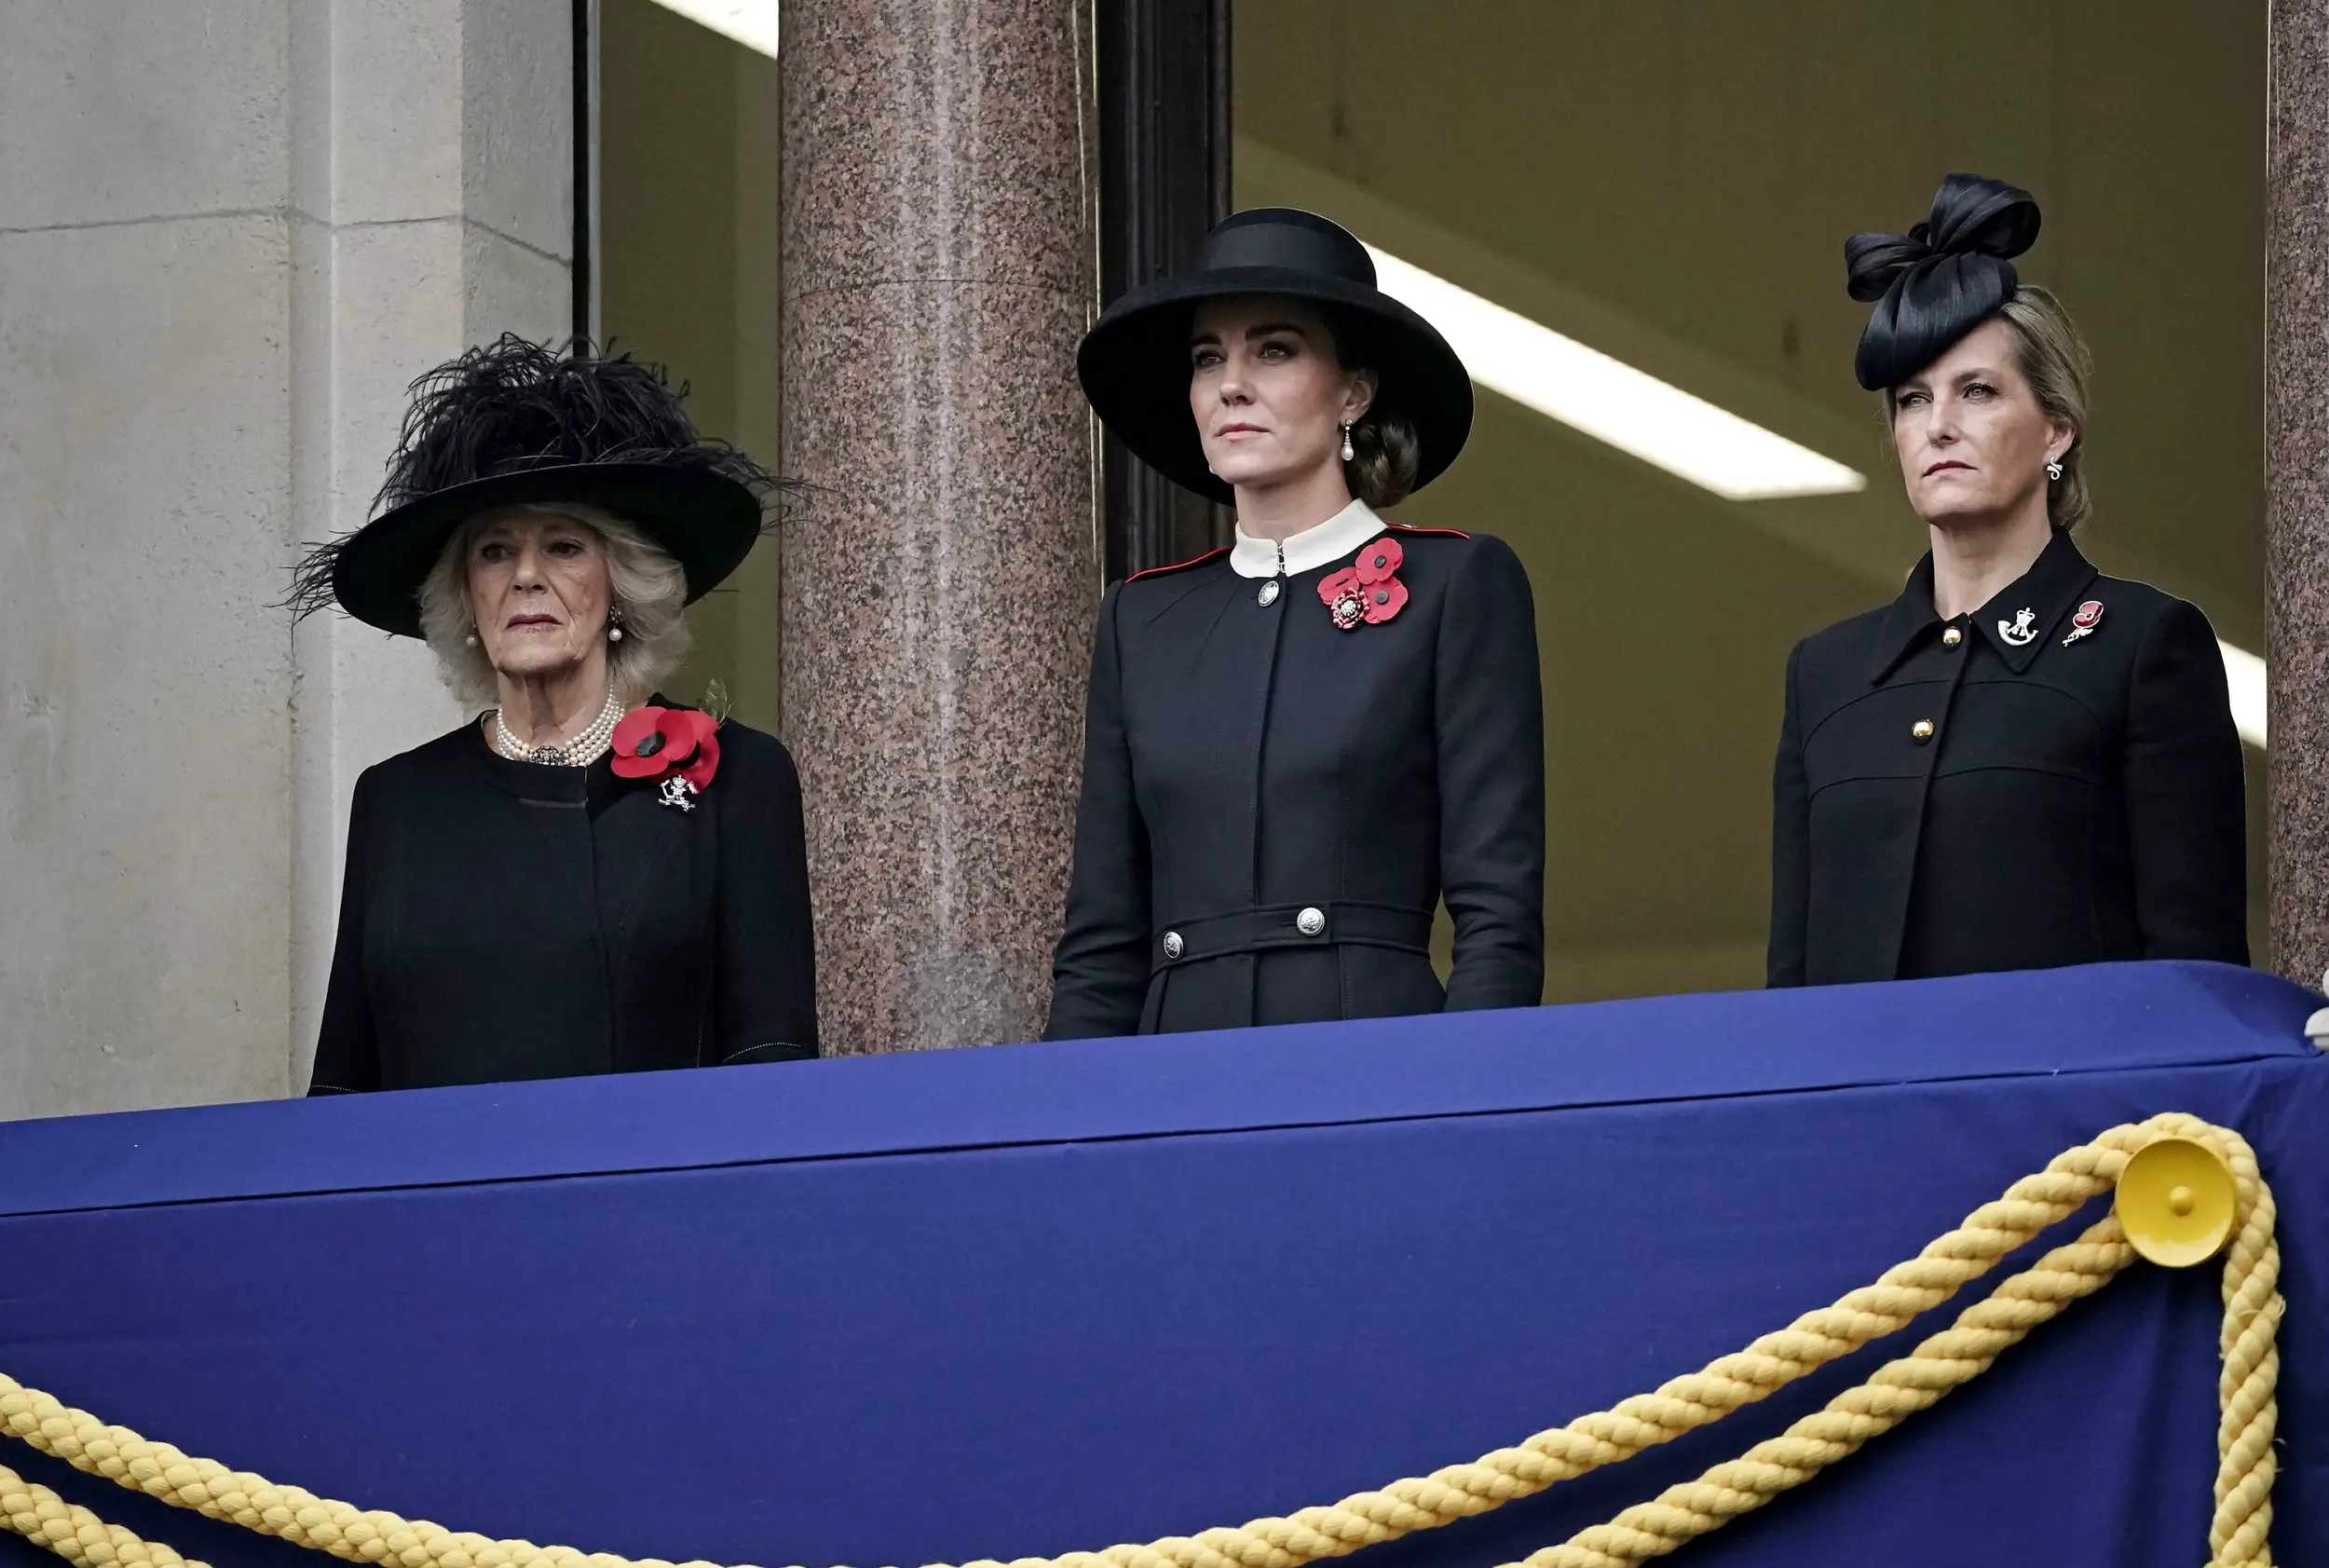 The Duchess of Cambridge watched the Remembrance Sunday Service from the Balcony